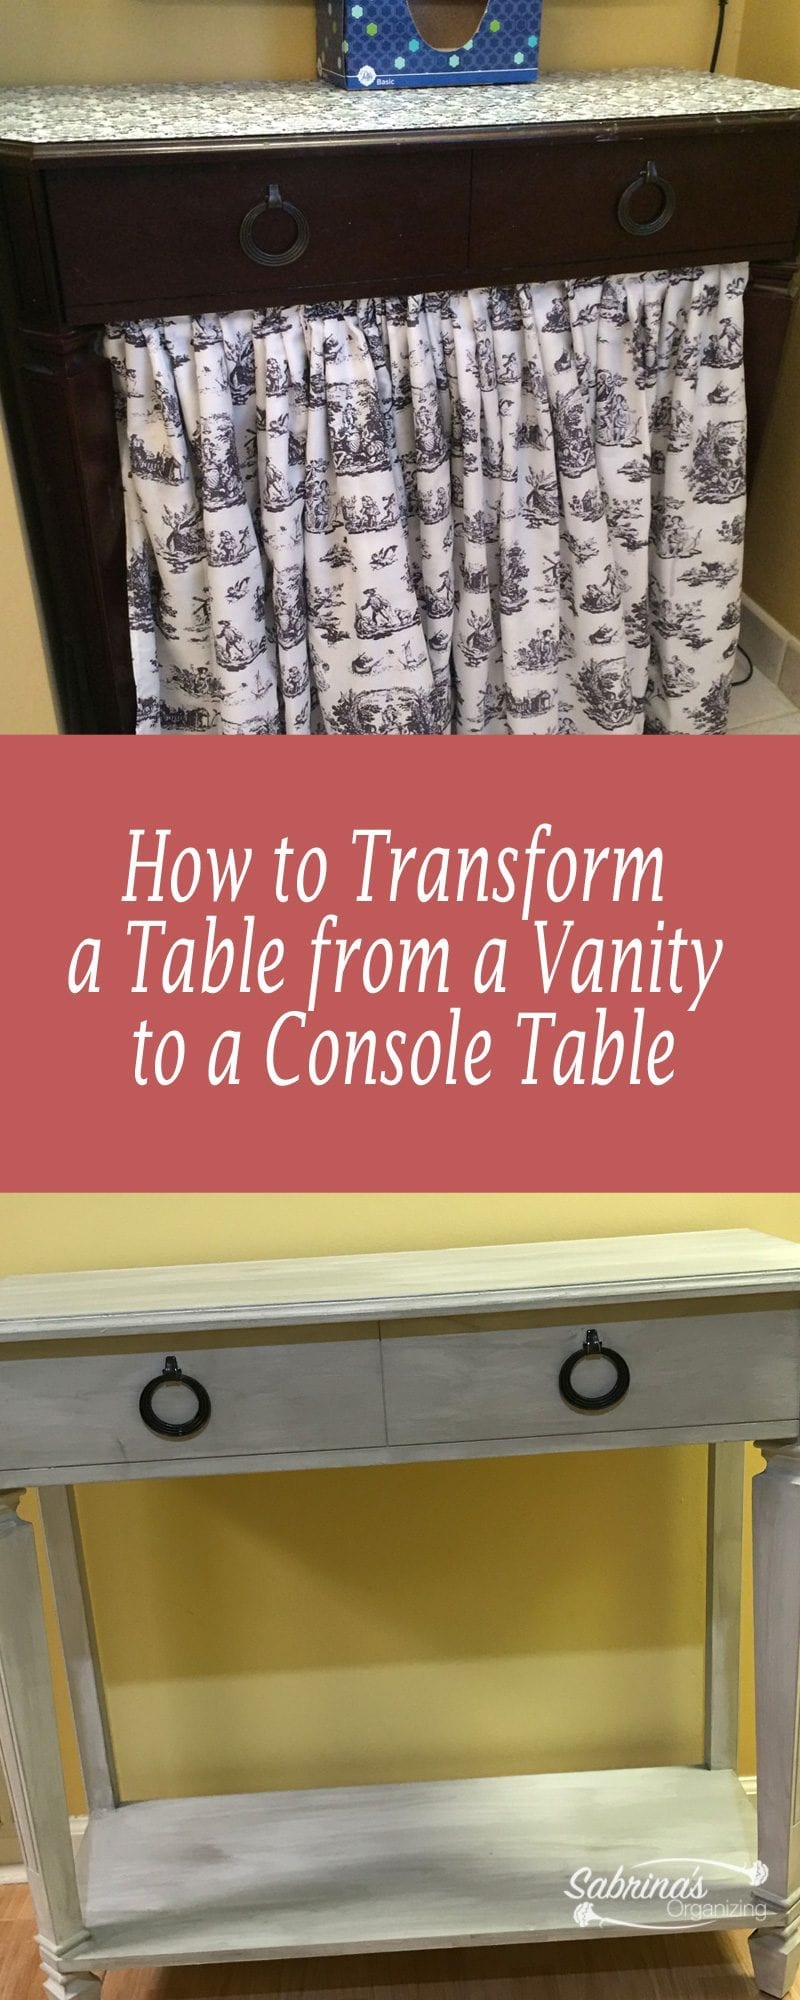 How to Transform a Table from a Vanity back to a Console Table